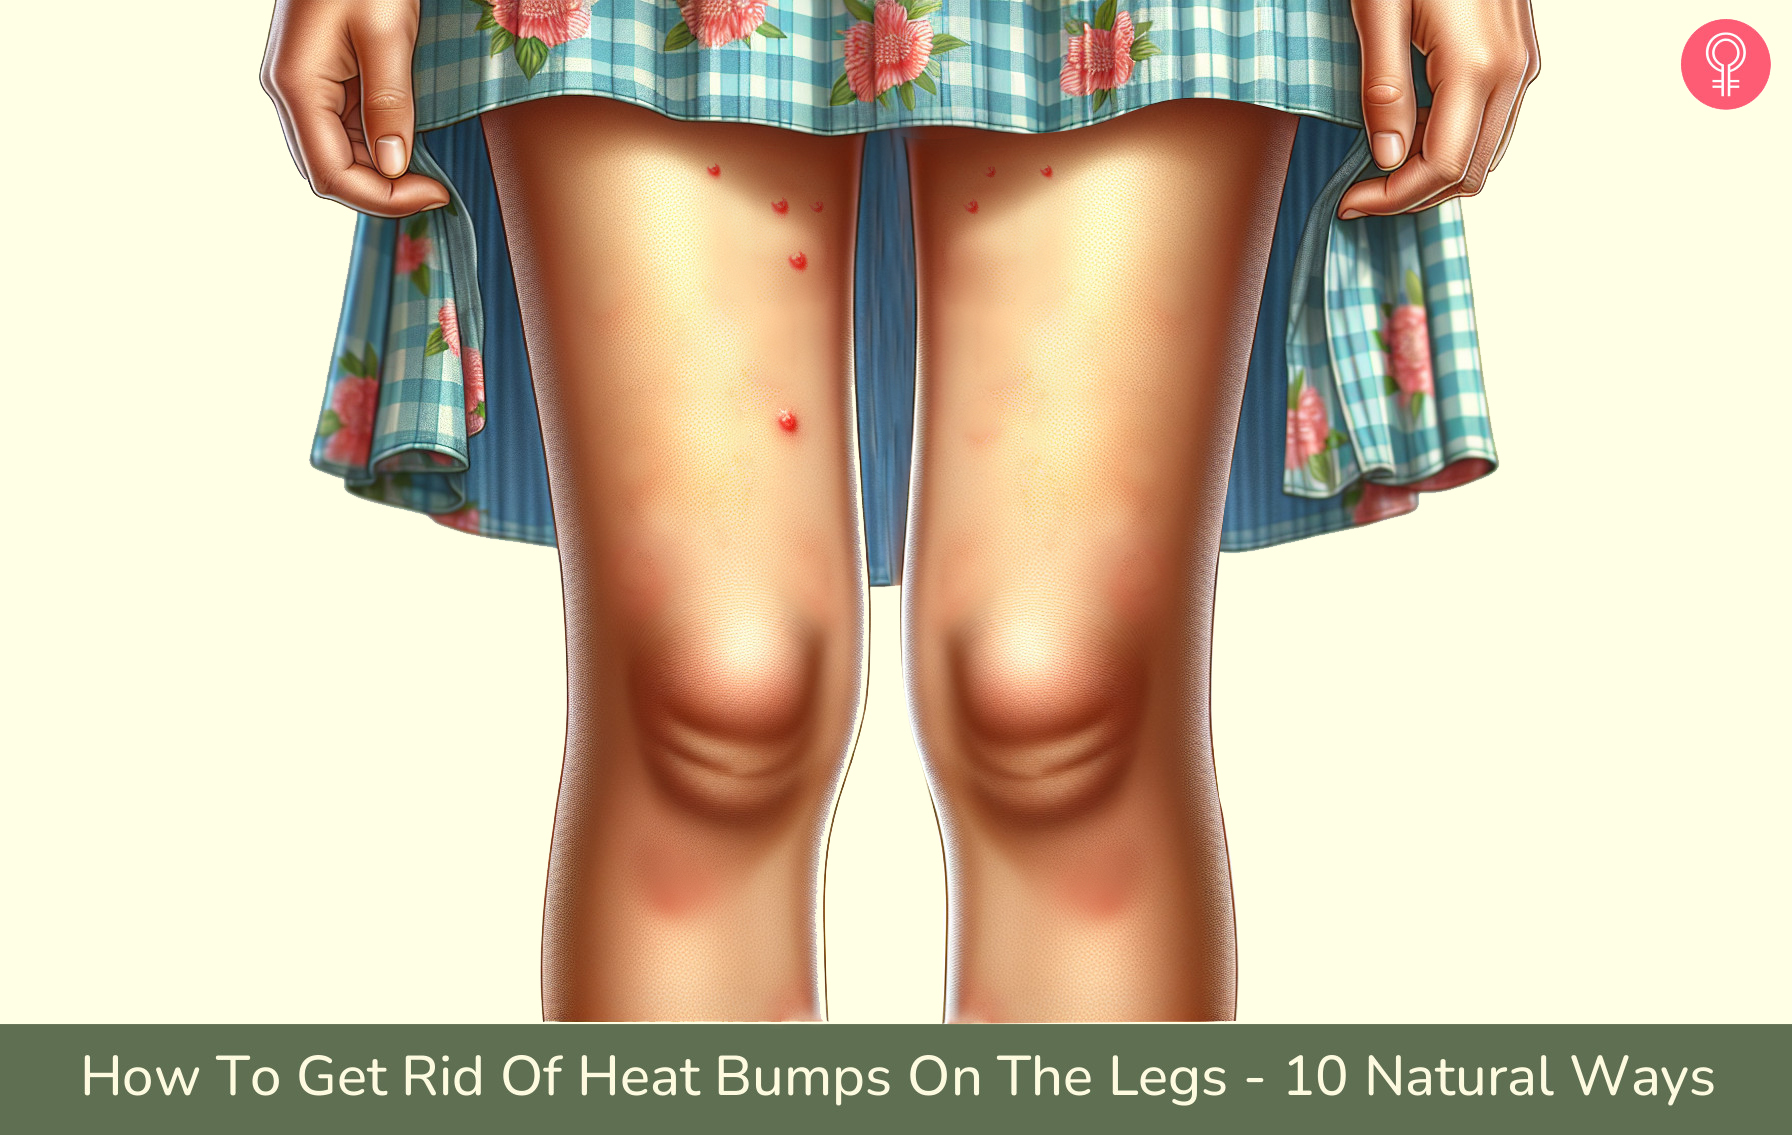 How To Get Rid Of Heat Bumps On The Legs - 10 Natural Ways